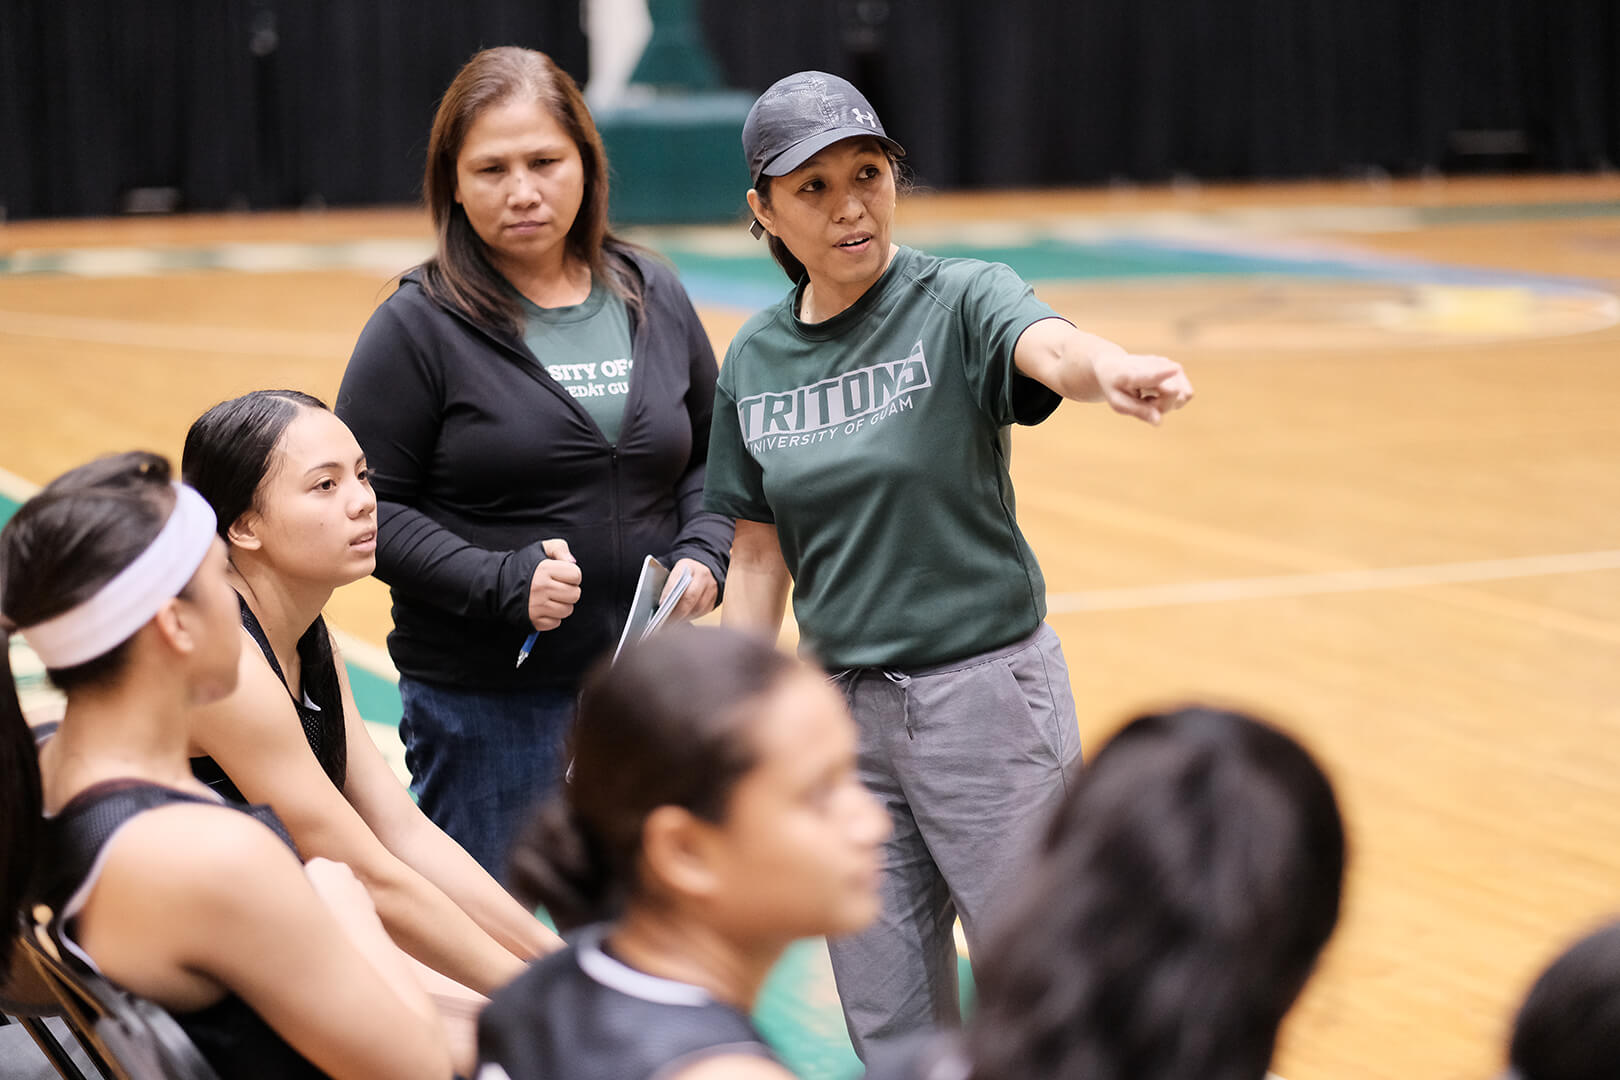  UOG Head Coach Cecile Olandez gives the Tritons direction at halftime.